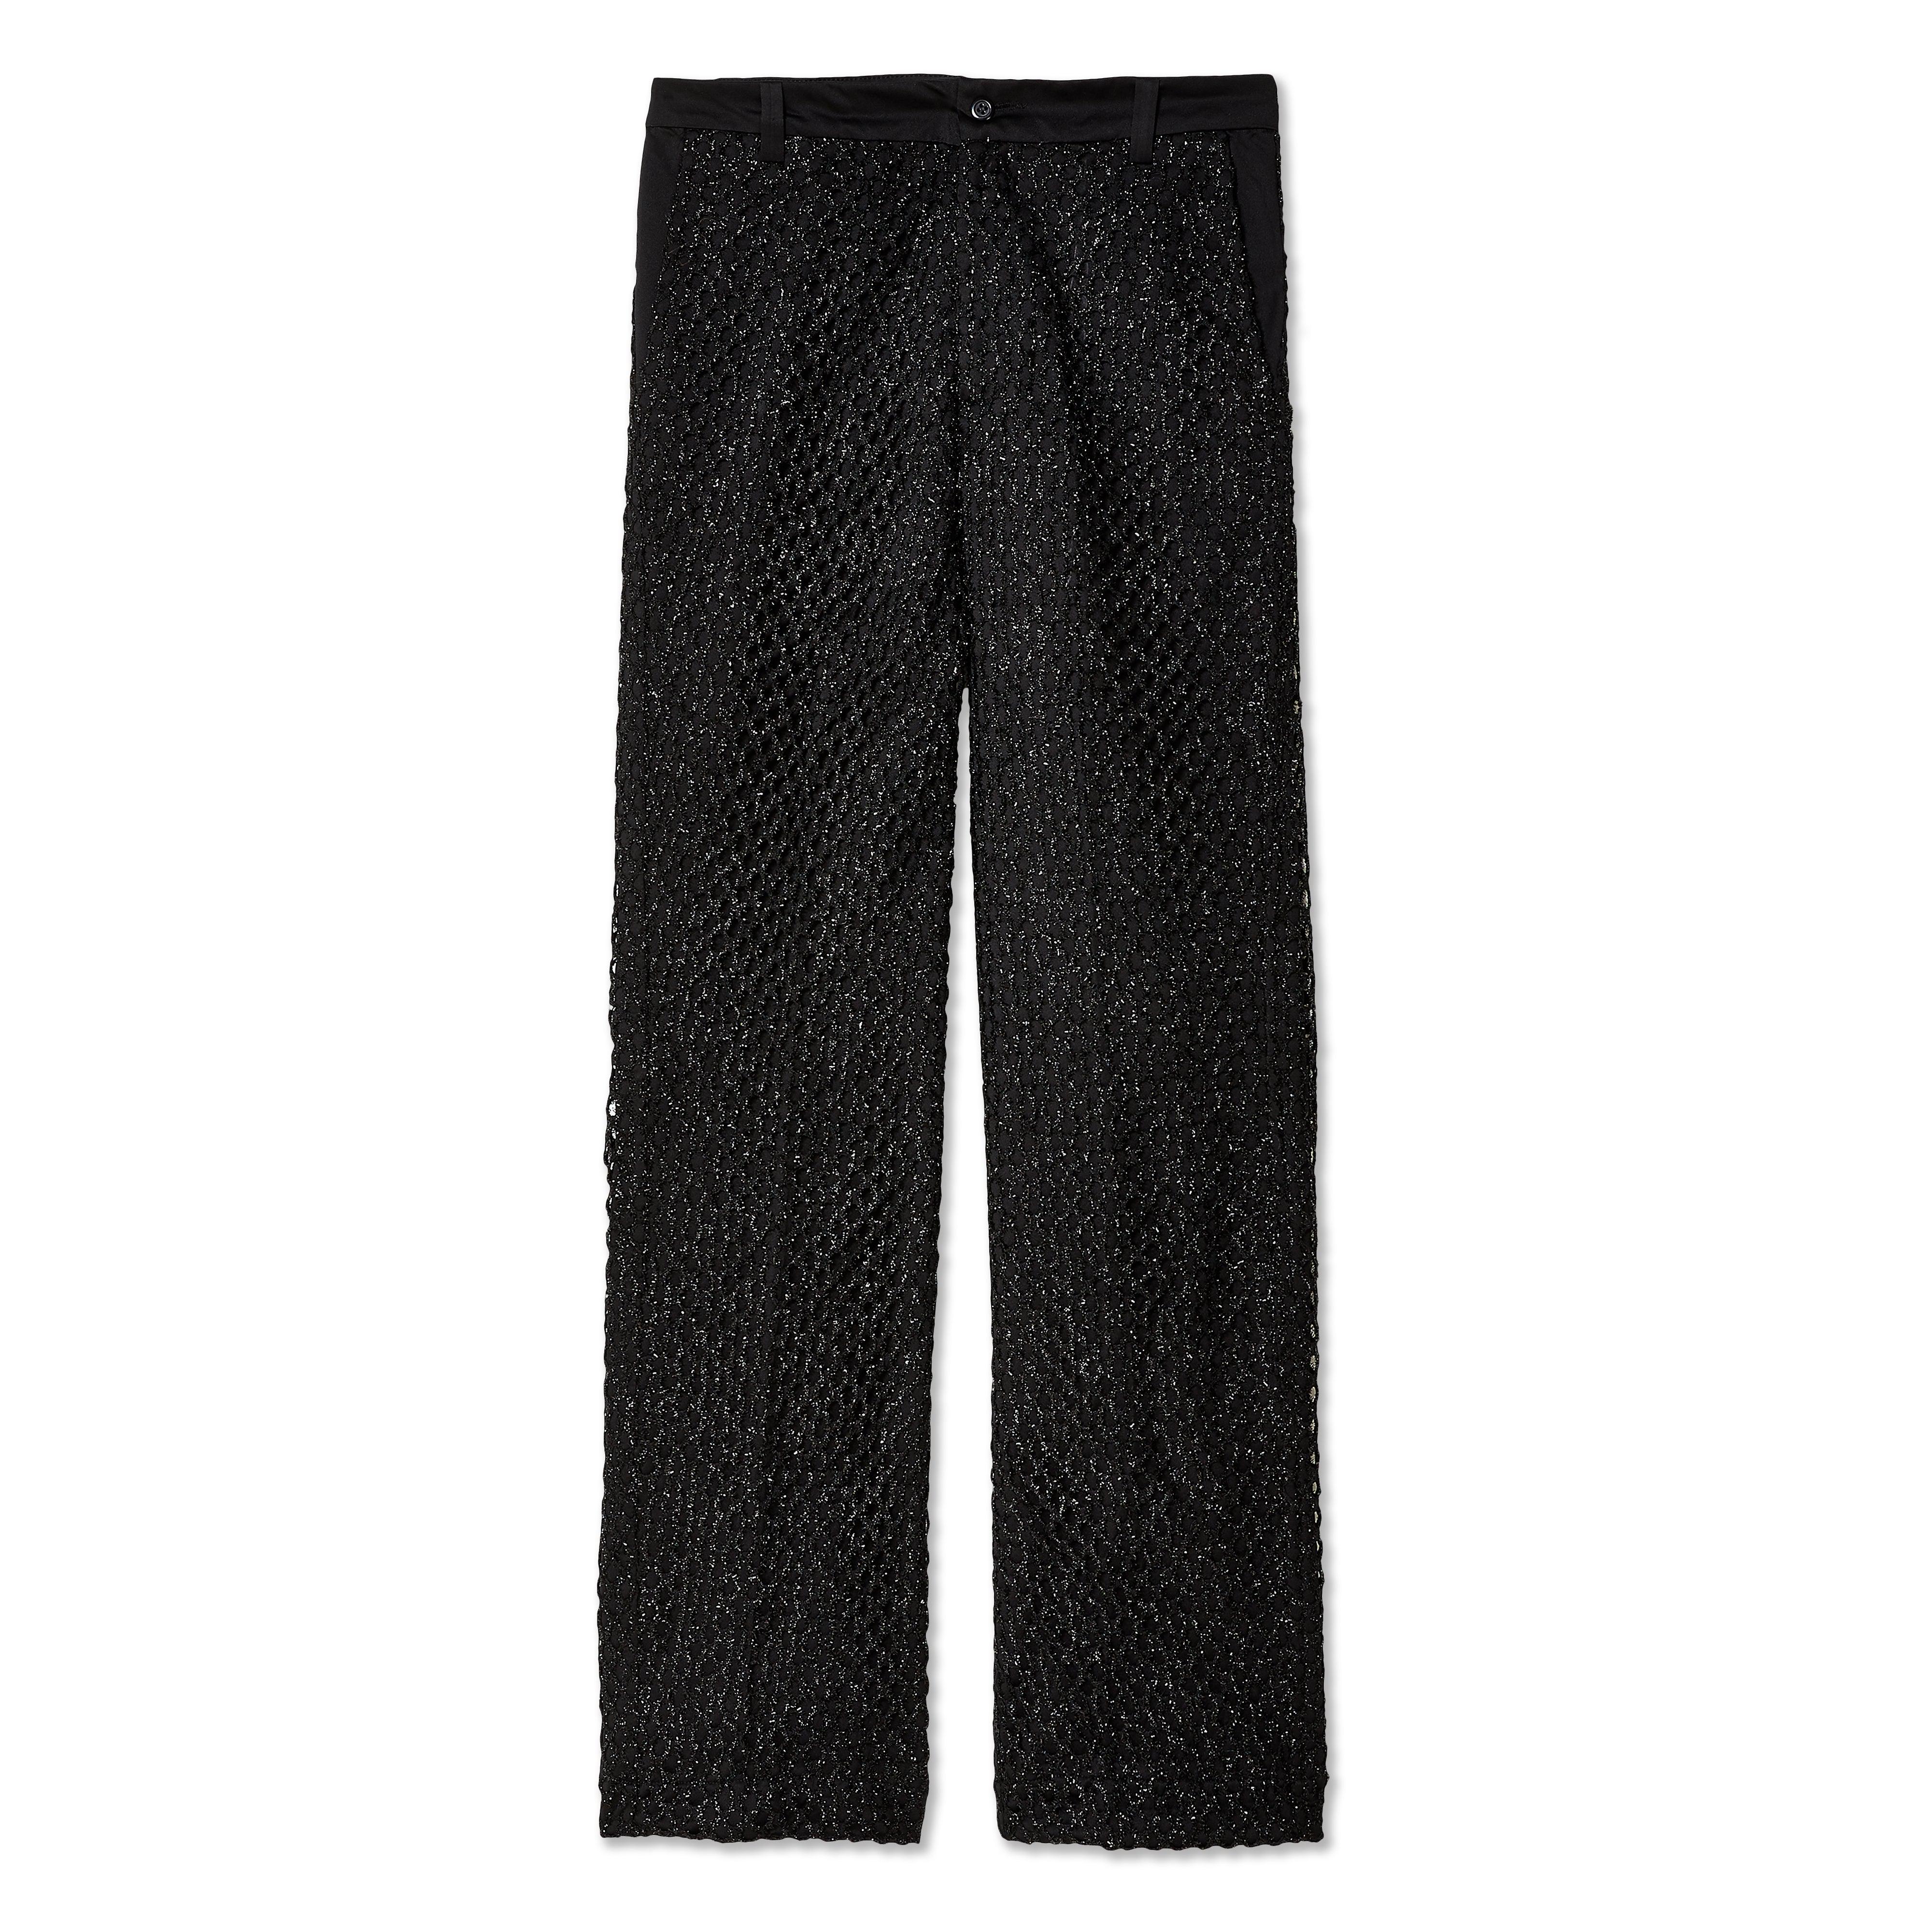 Tokyo James Men's Perforated Net Silk Trousers (Black) by TOKYO JAMES